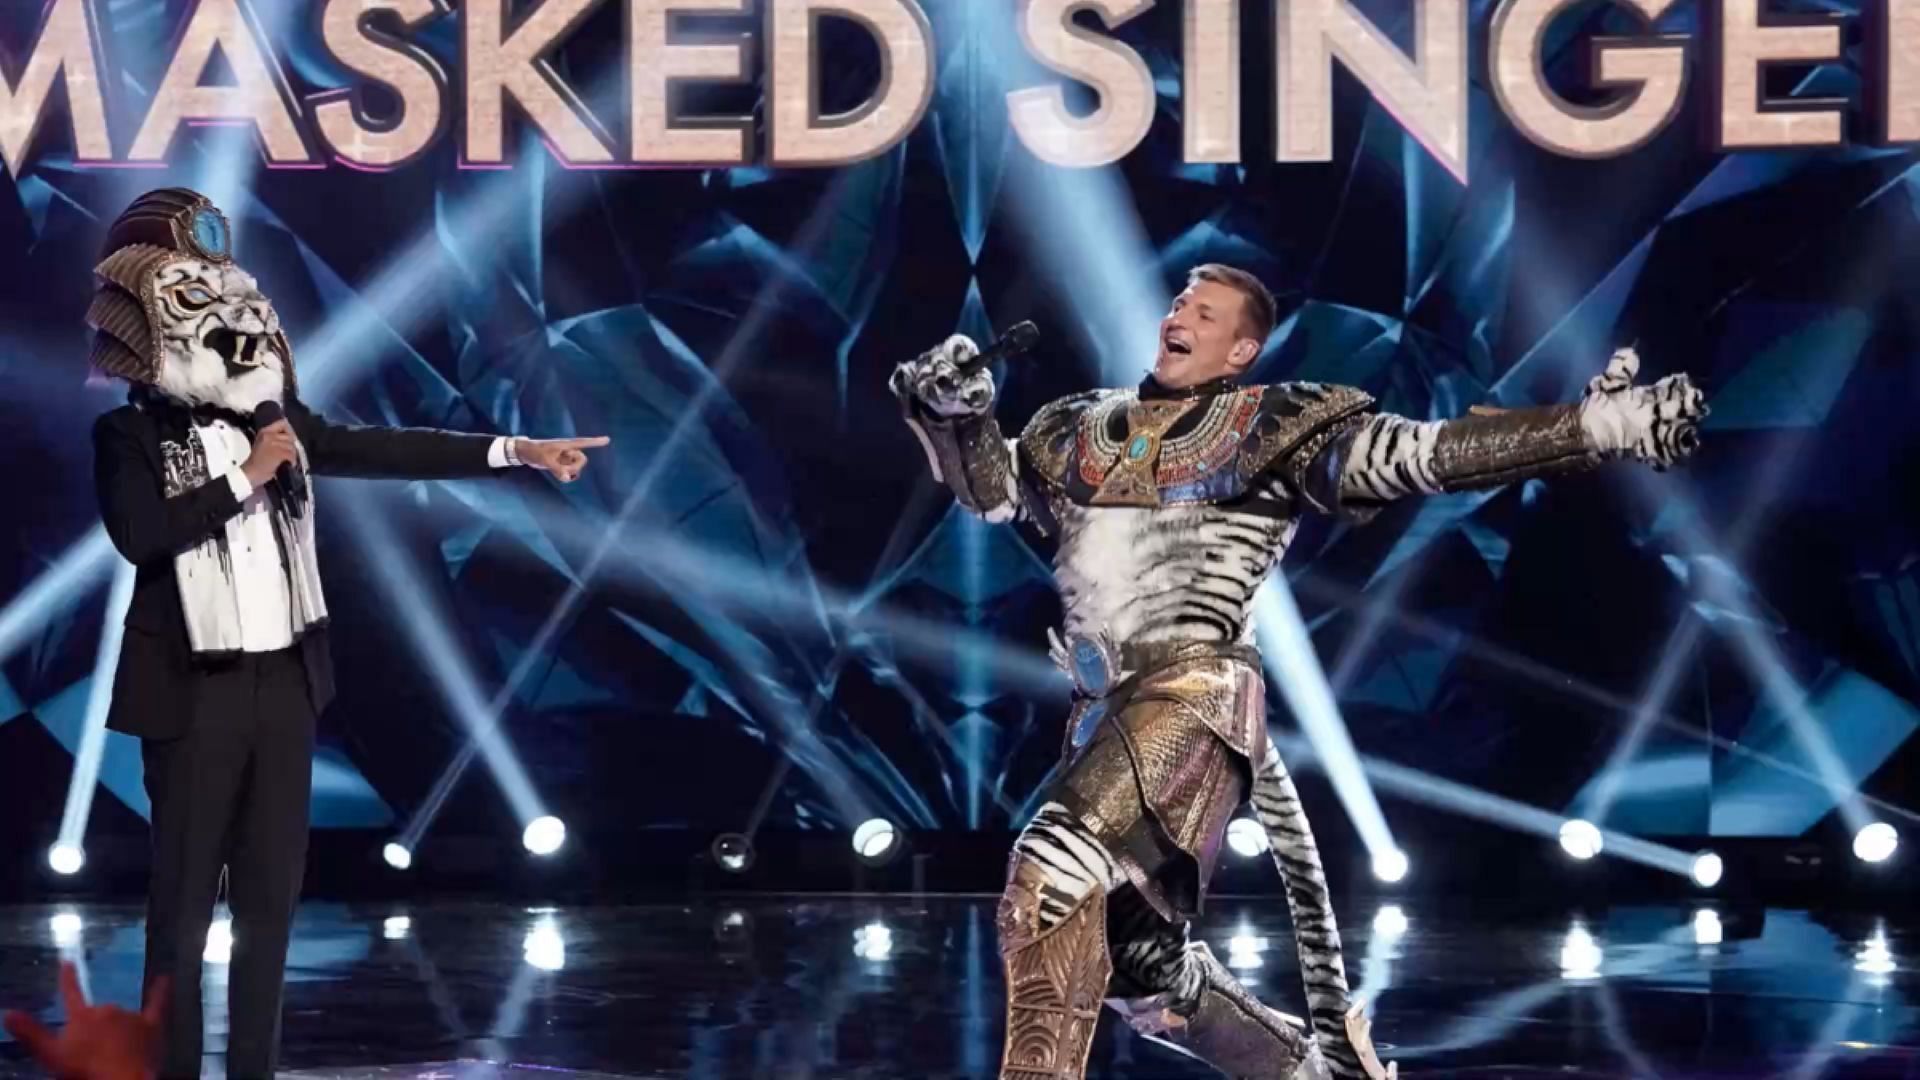 Former New England Patriot Rob Gronkowski appearing on The Masked Singer